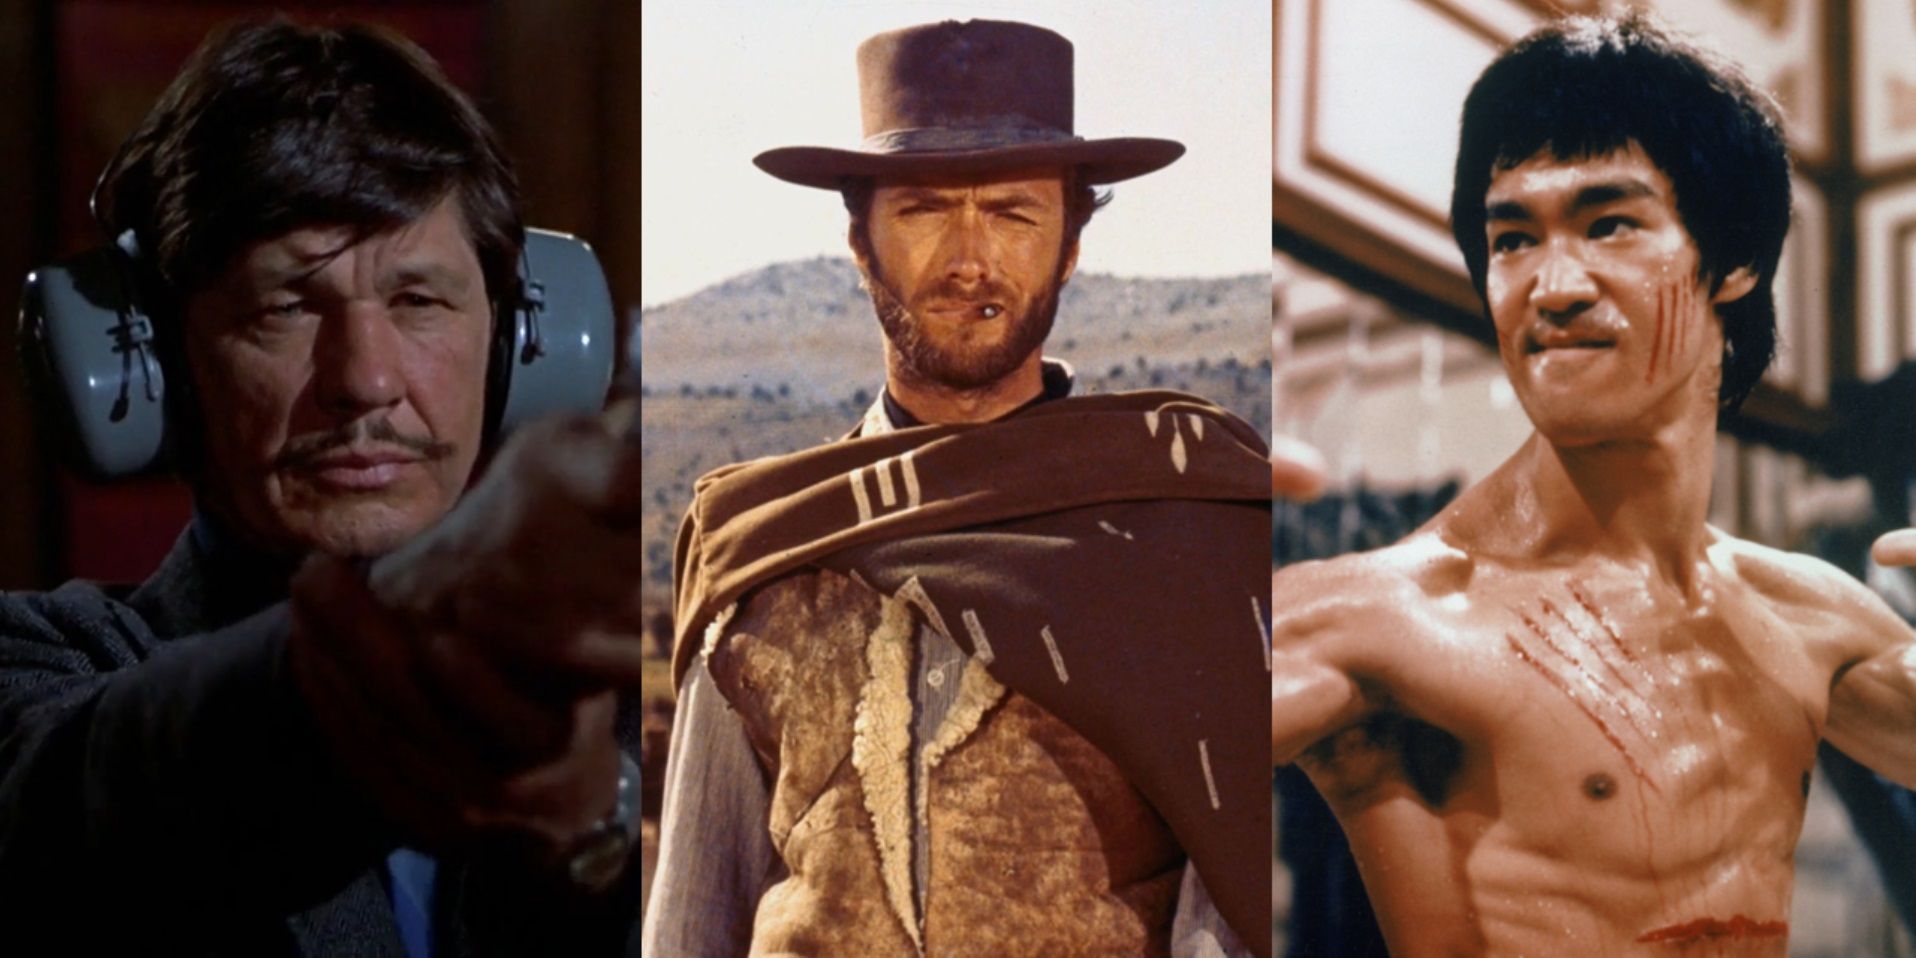 Split image of Charles Bronson in Death Wish, Clint Eastwood in The Good the Bad and the Ugly, and Bruce Lee in Enter the Dragon